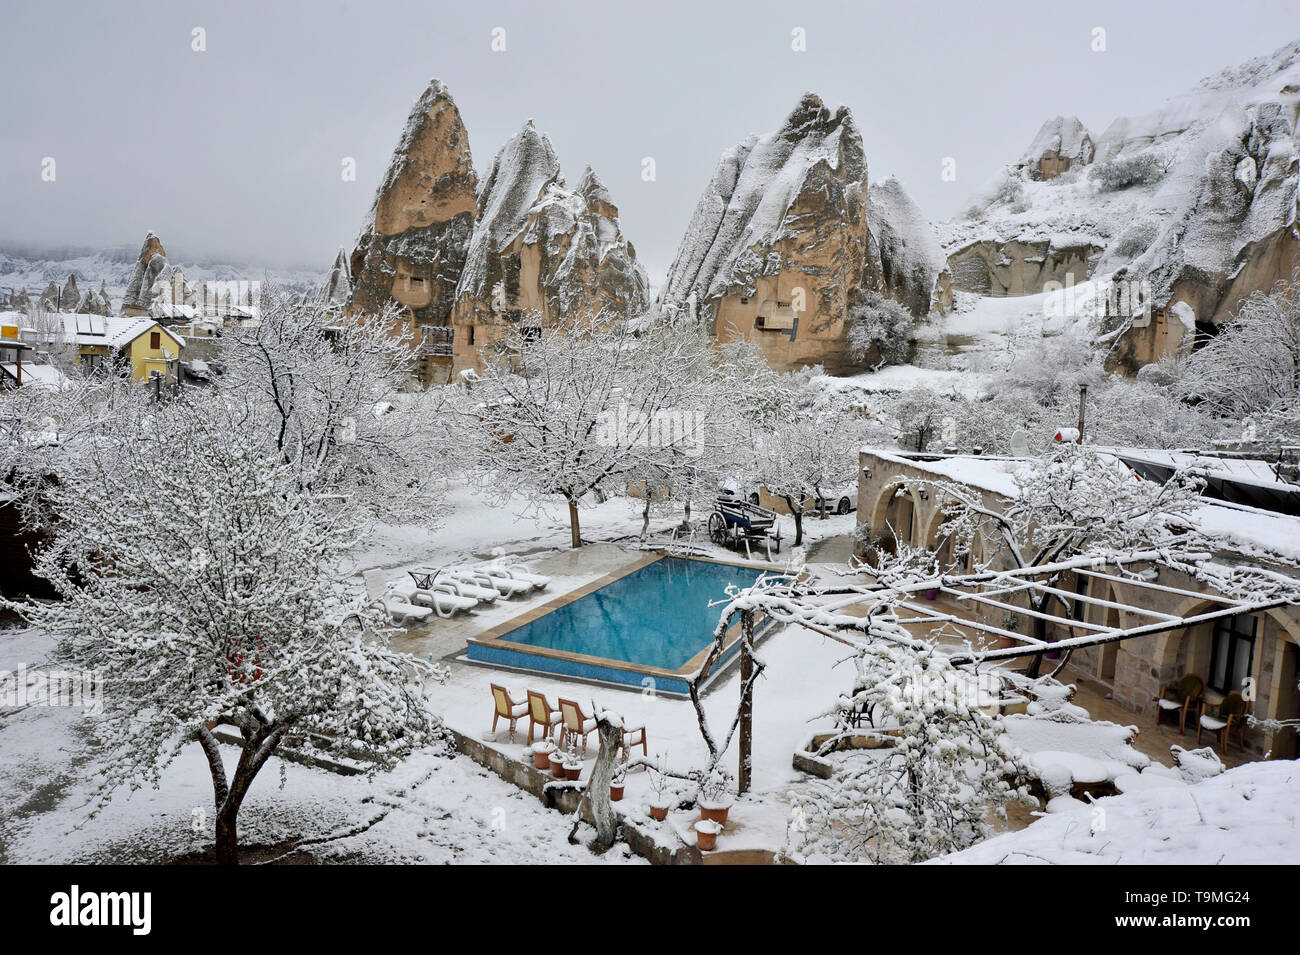 Swimming pool and unusual natural stone formations with snow in Goreme in the Cappadocia region of Turkey Stock Photo